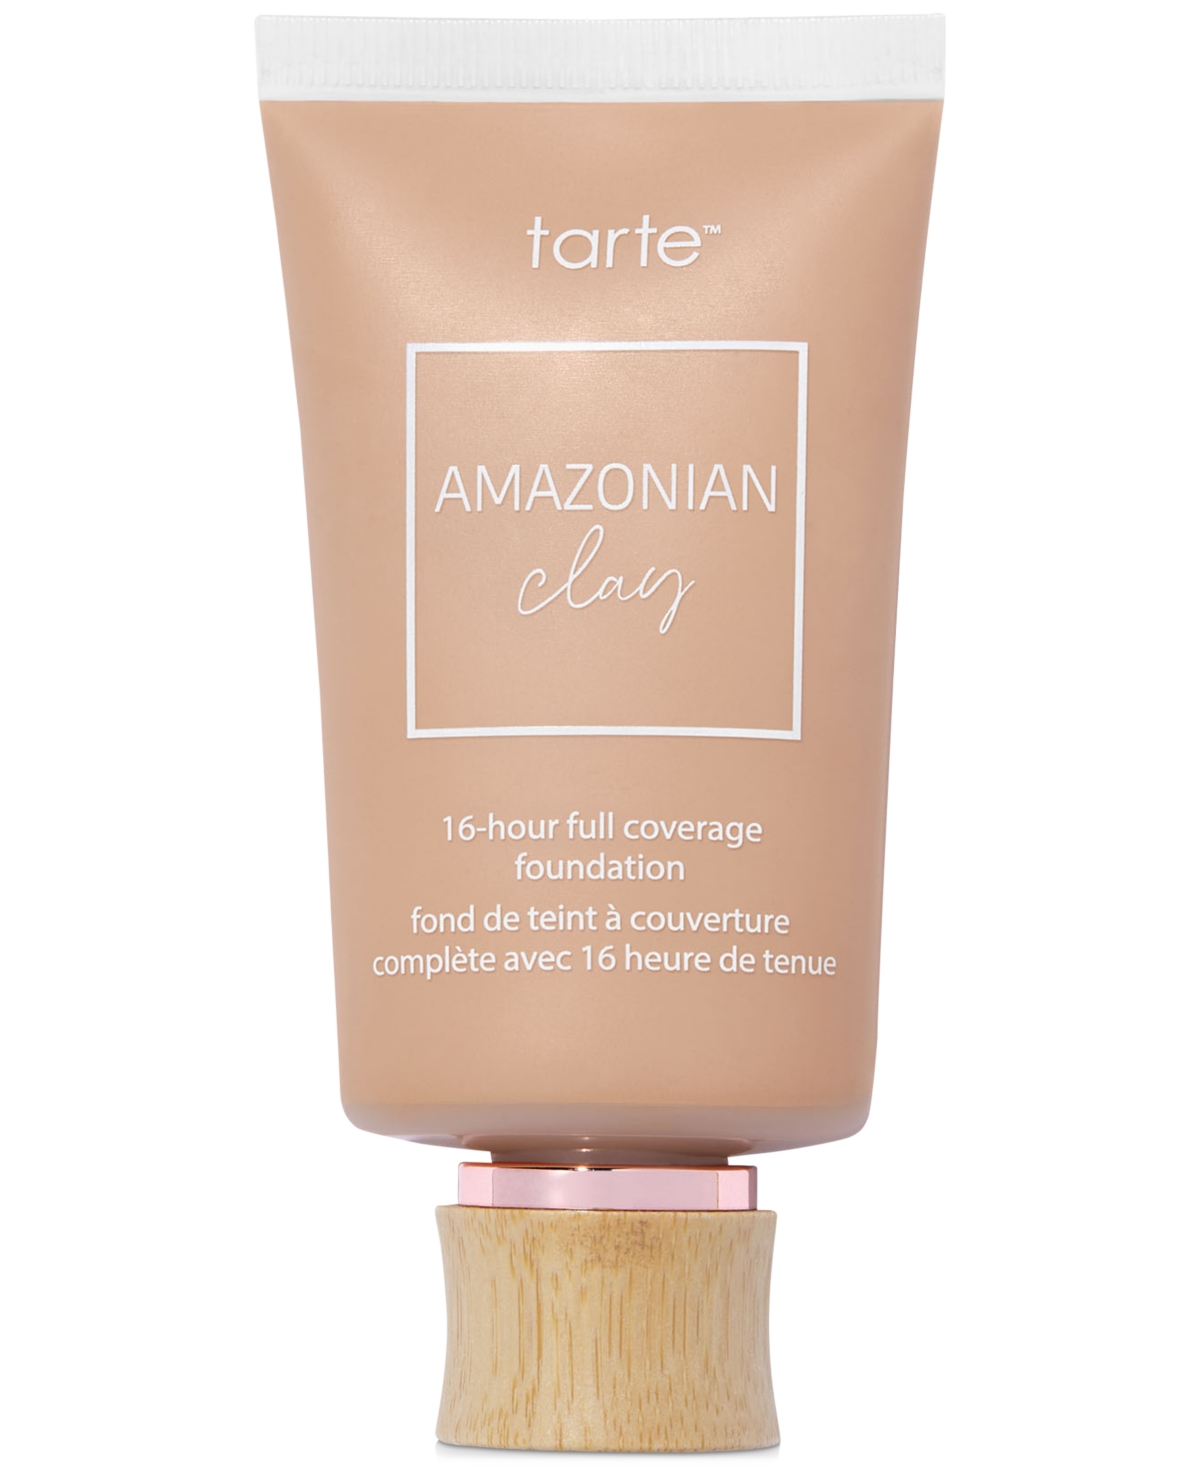 Tarte Amazonian Clay 16-hour Full Coverage Foundation In Stan-deepsand - Tan-deep Skin With Warm